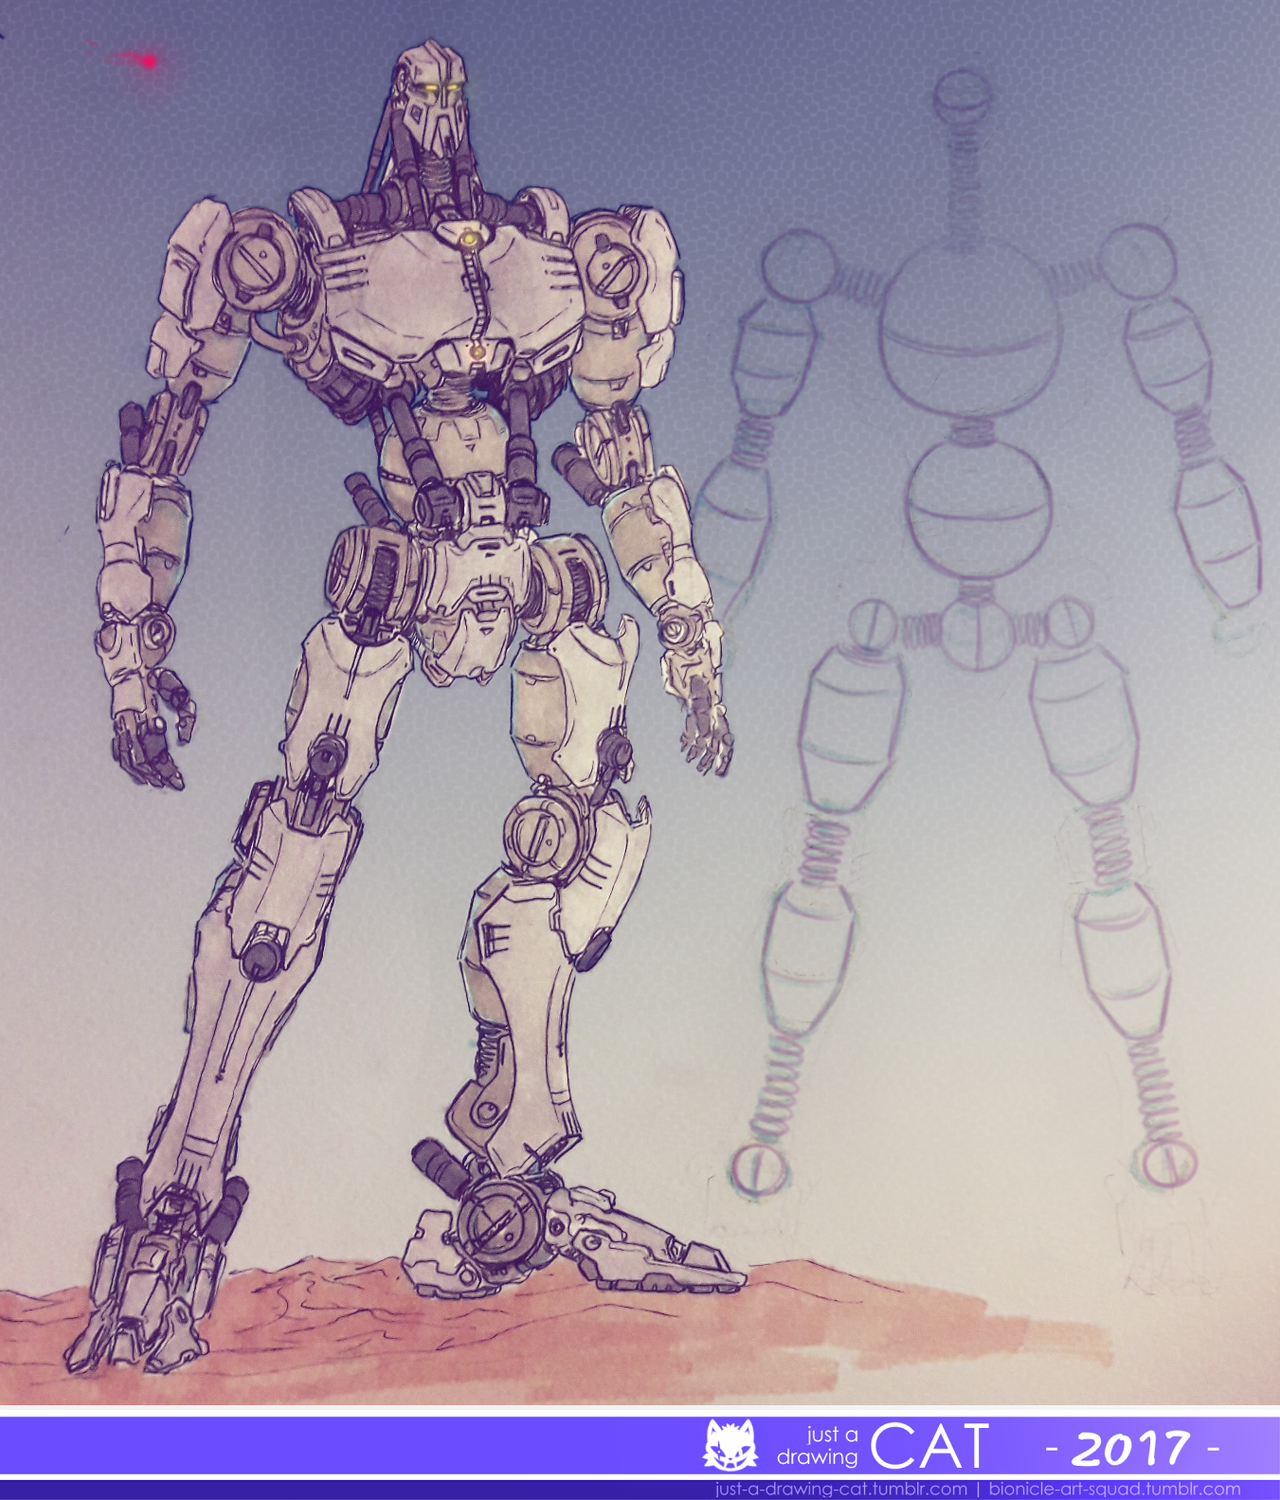 [Fan-Arts] Images du net - Page 21 The_great_spirit_robot_by_just_a_drawing_cat-dawhcwo